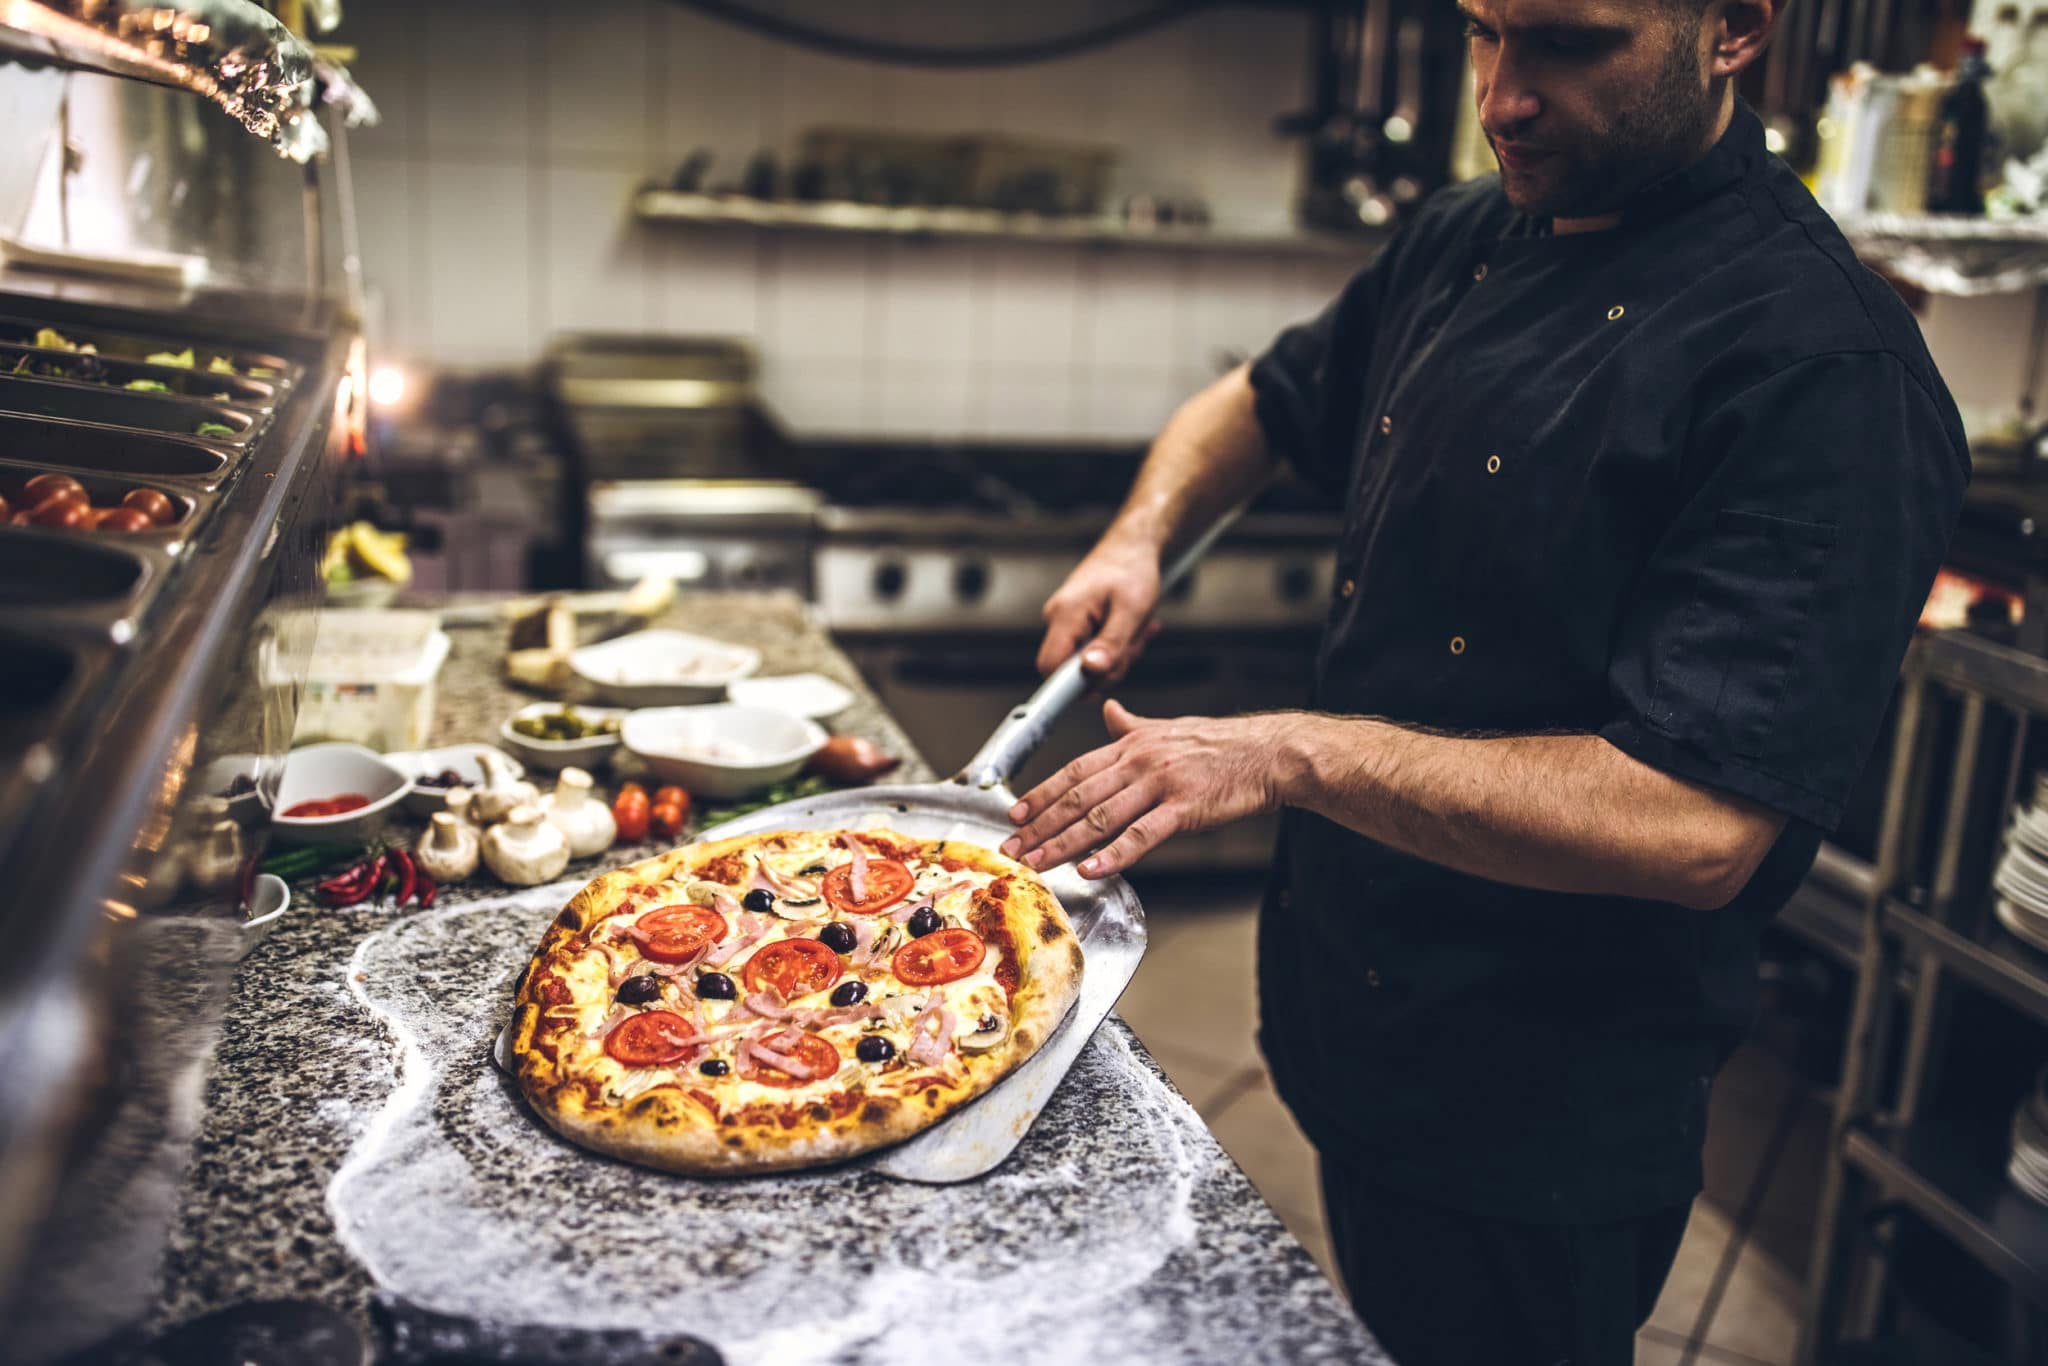 A chef preparing a pizza using foodservice products.